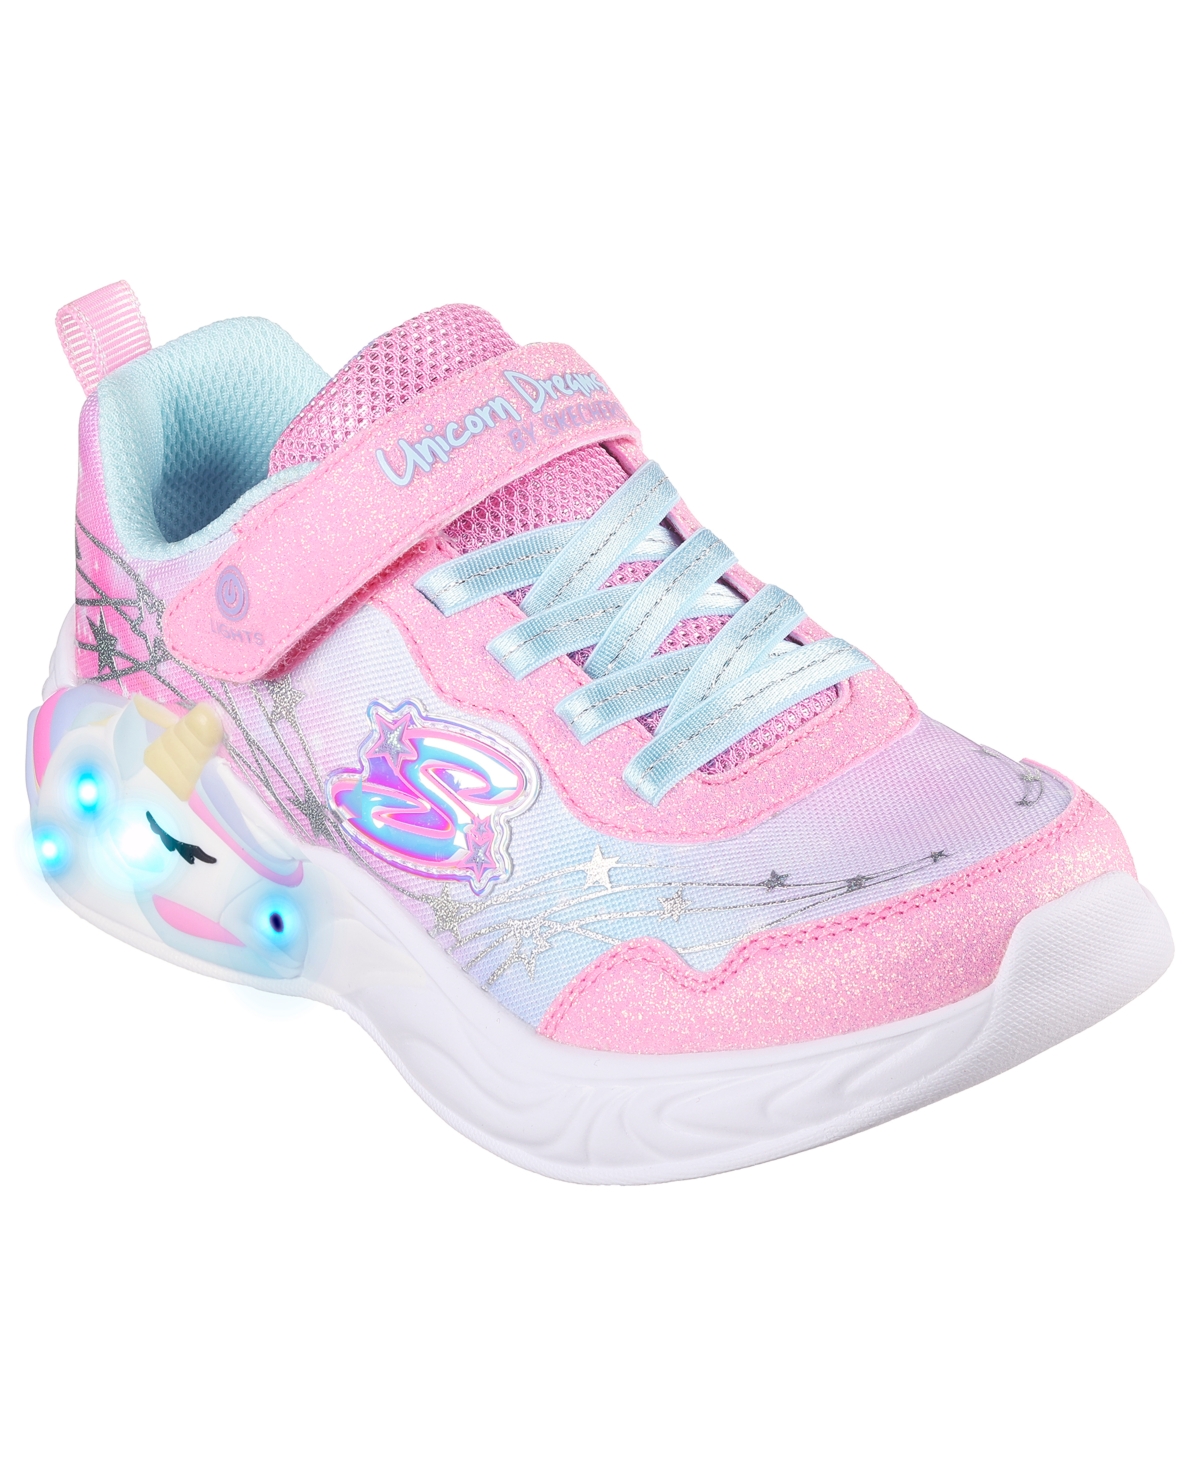 Shop Skechers Big Girls S Lights- Unicorn Dreams Adjustable Strap Light-up Casual Sneakers From Finish Line In Pink,turquoise